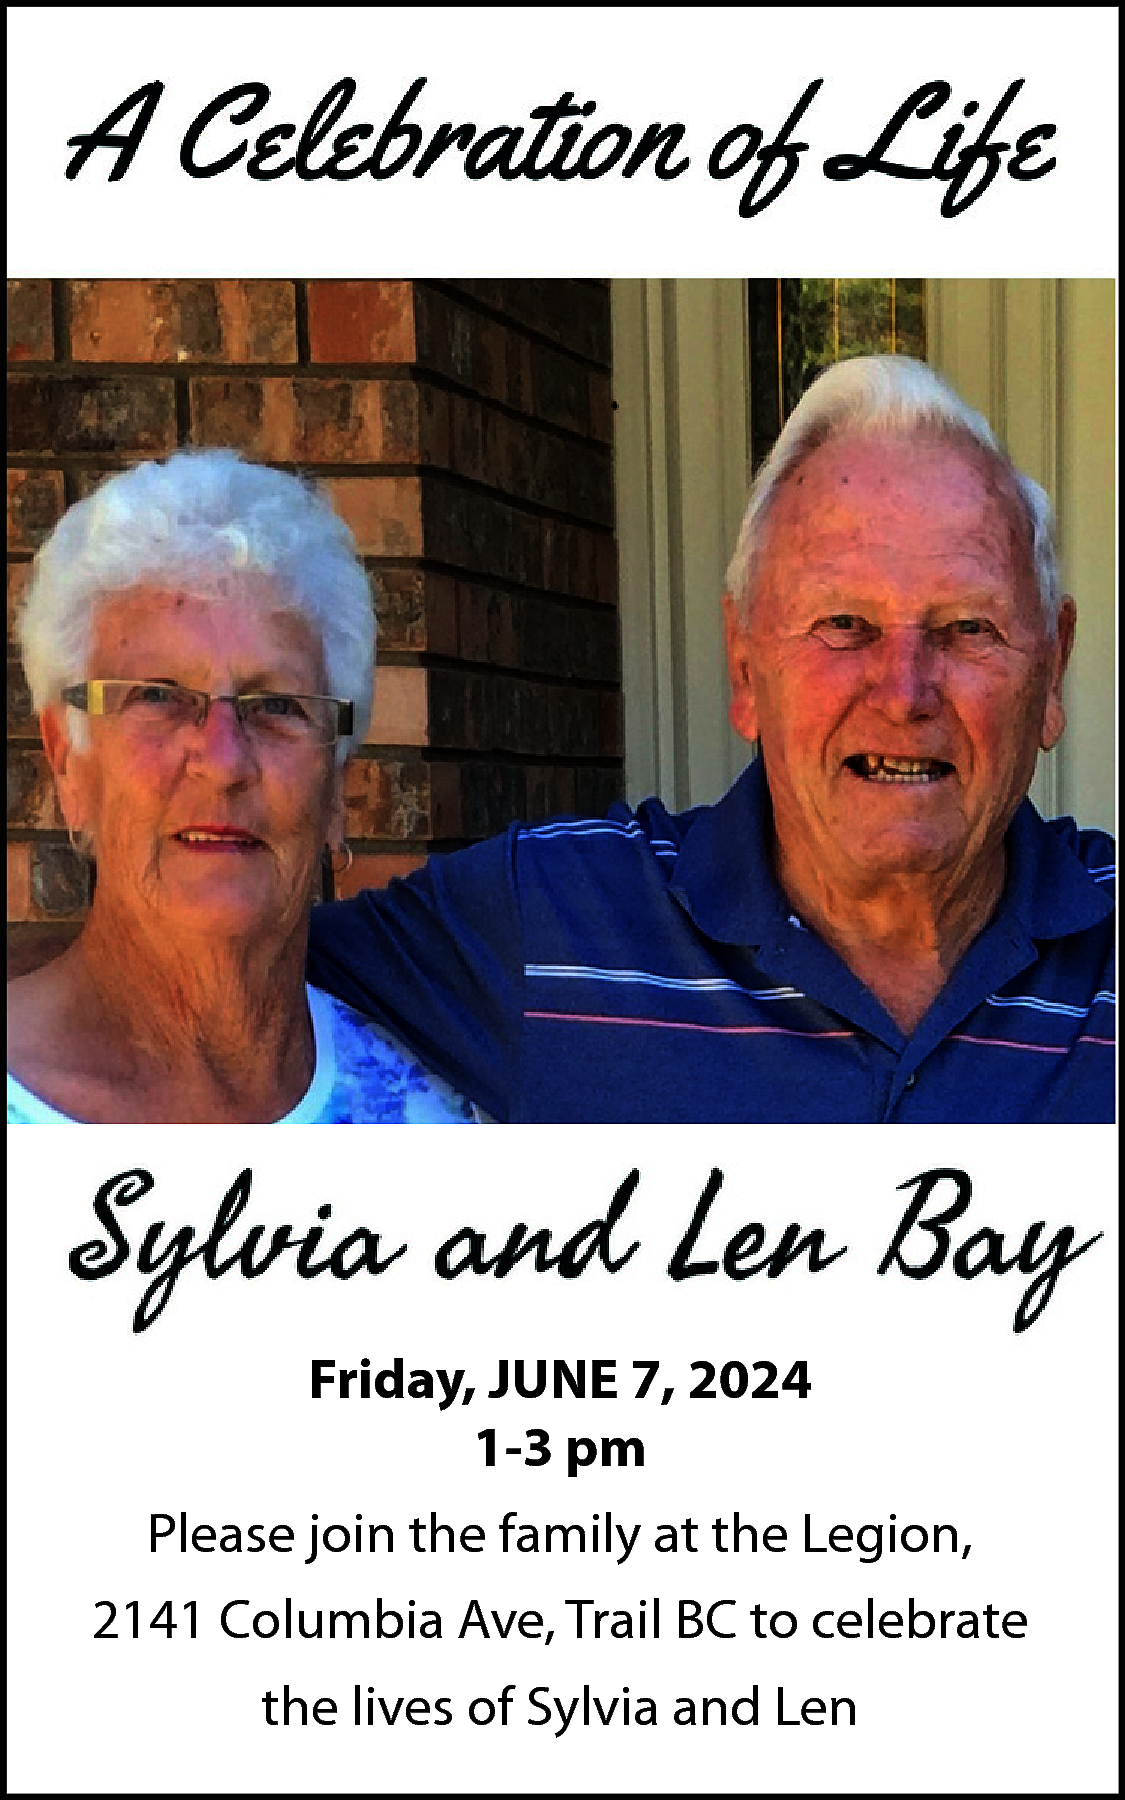 Friday, JUNE 7, 2024 <br>1-3  Friday, JUNE 7, 2024  1-3 pm  Please join the family at the Legion,  2141 Columbia Ave, Trail BC to celebrate  the lives of Sylvia and Len    